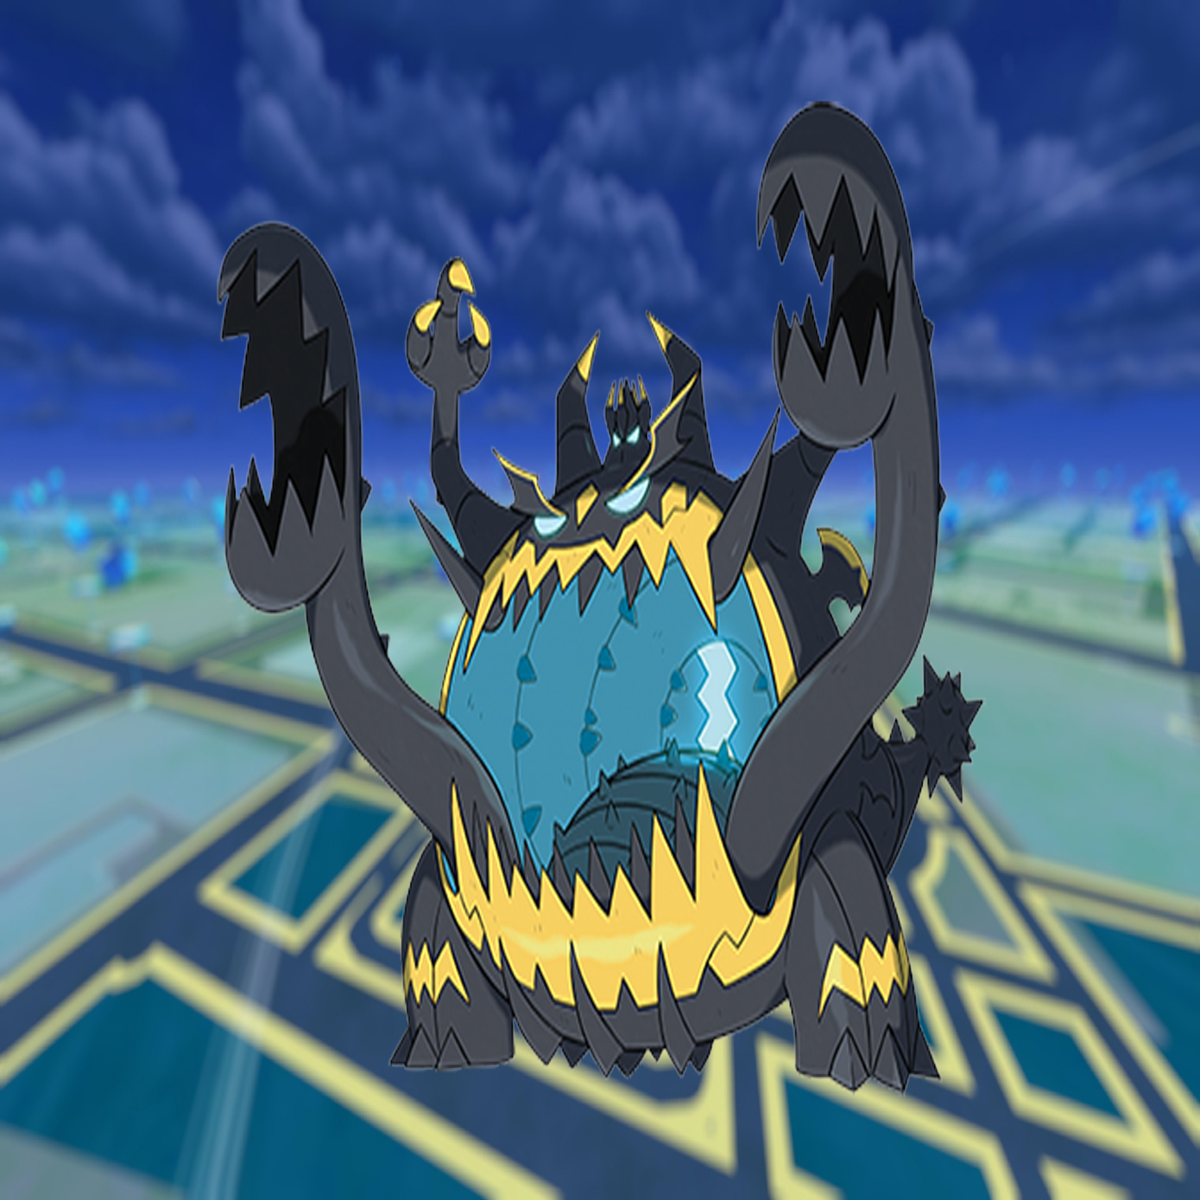 Pokemon Go Guzzlord Raid Guide: Best Counters, Weaknesses and More